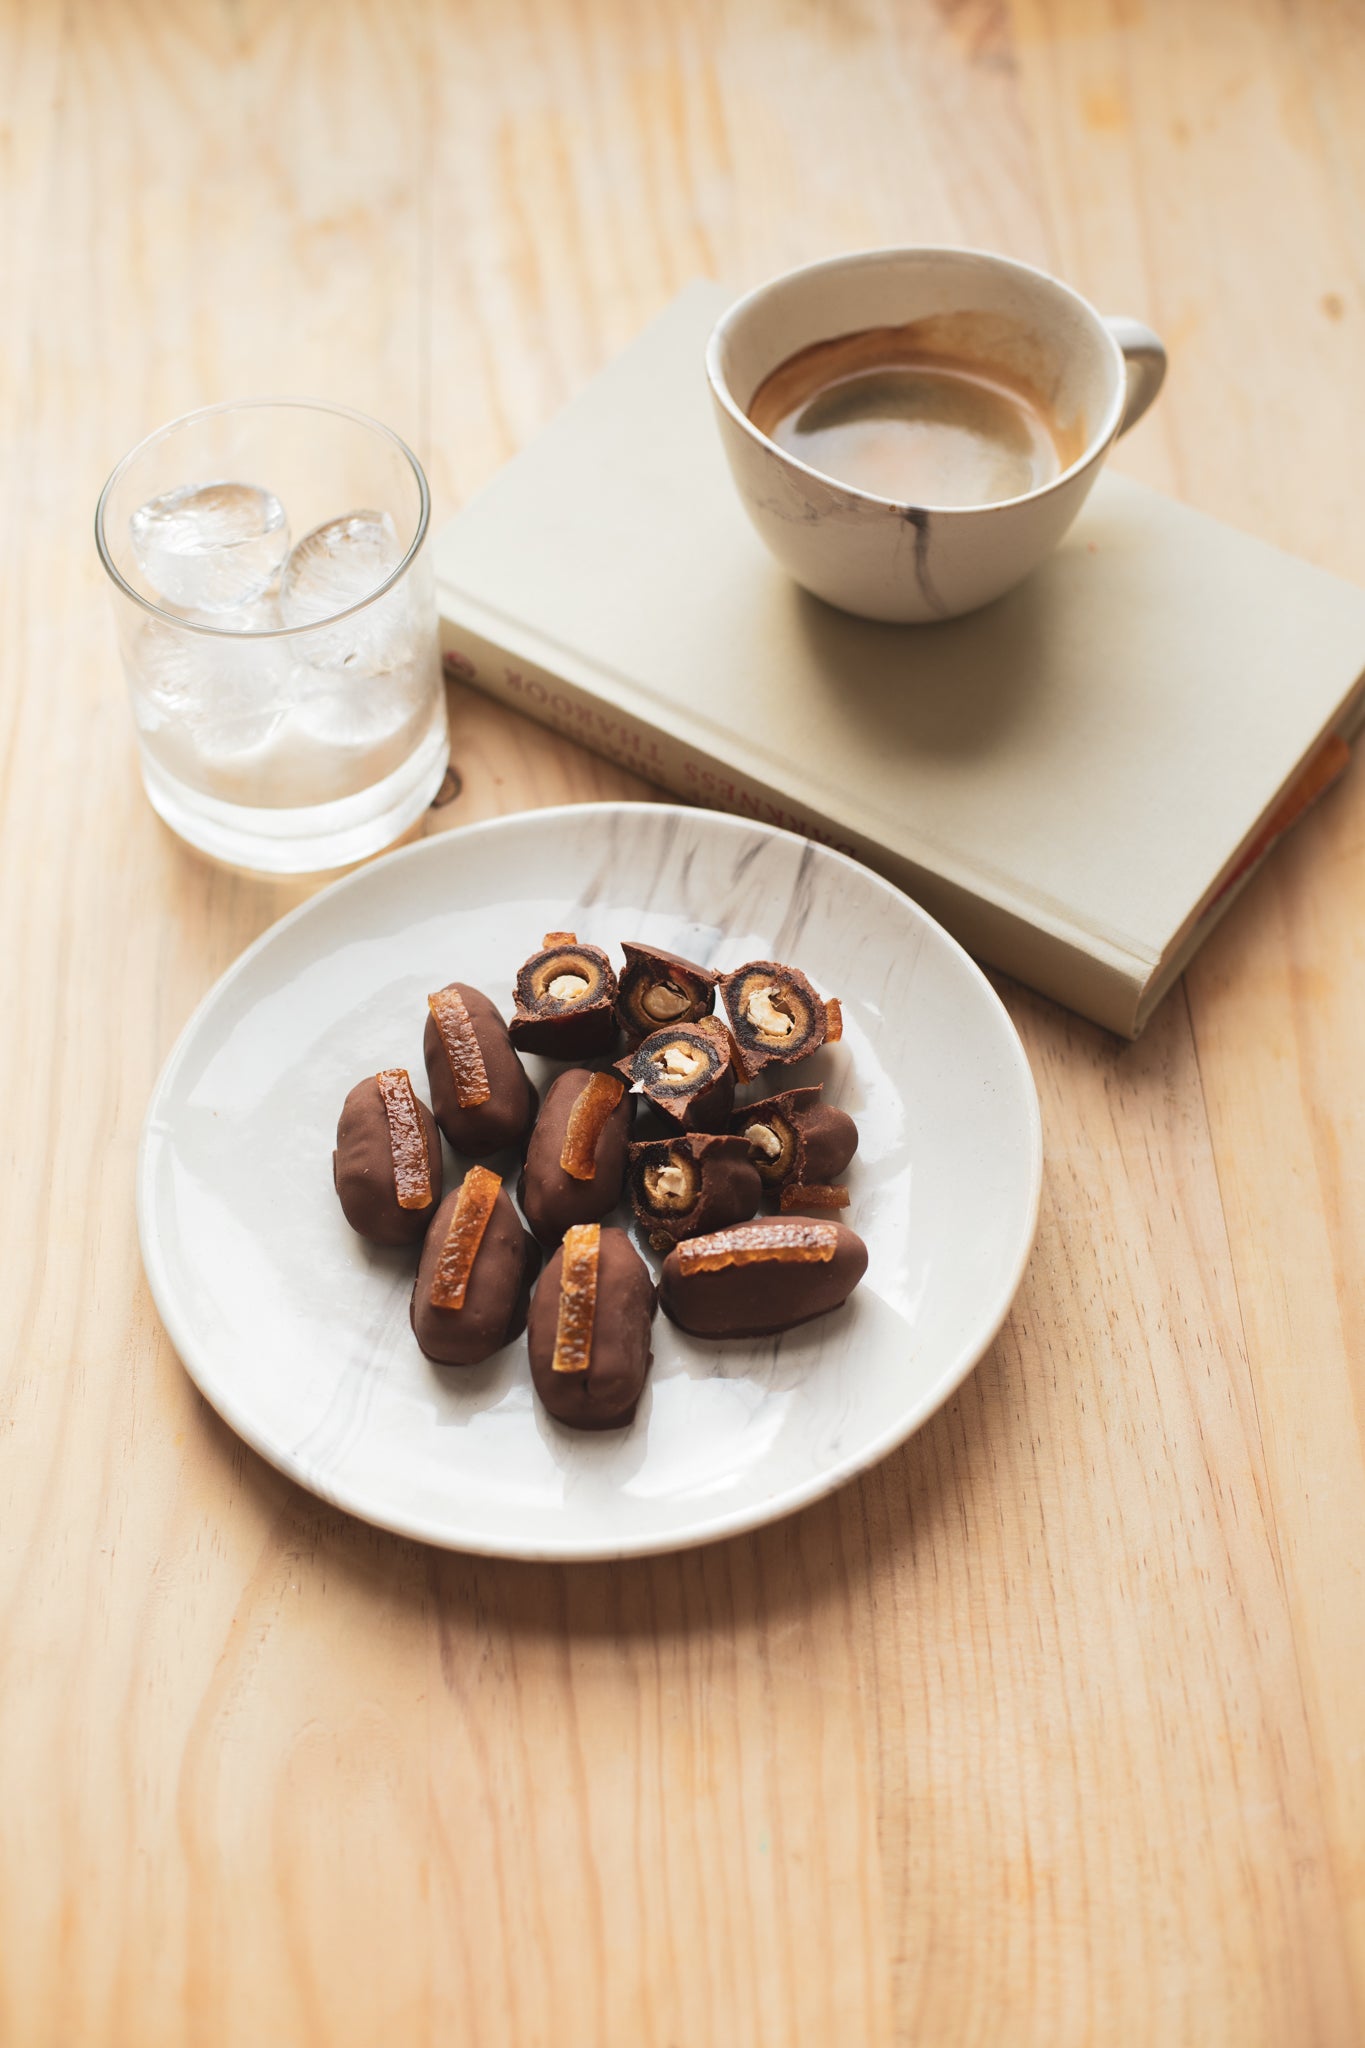 Stuffed dates dipped in dark craft chocolate topped with candied orange peels. A favourite coffee snack.